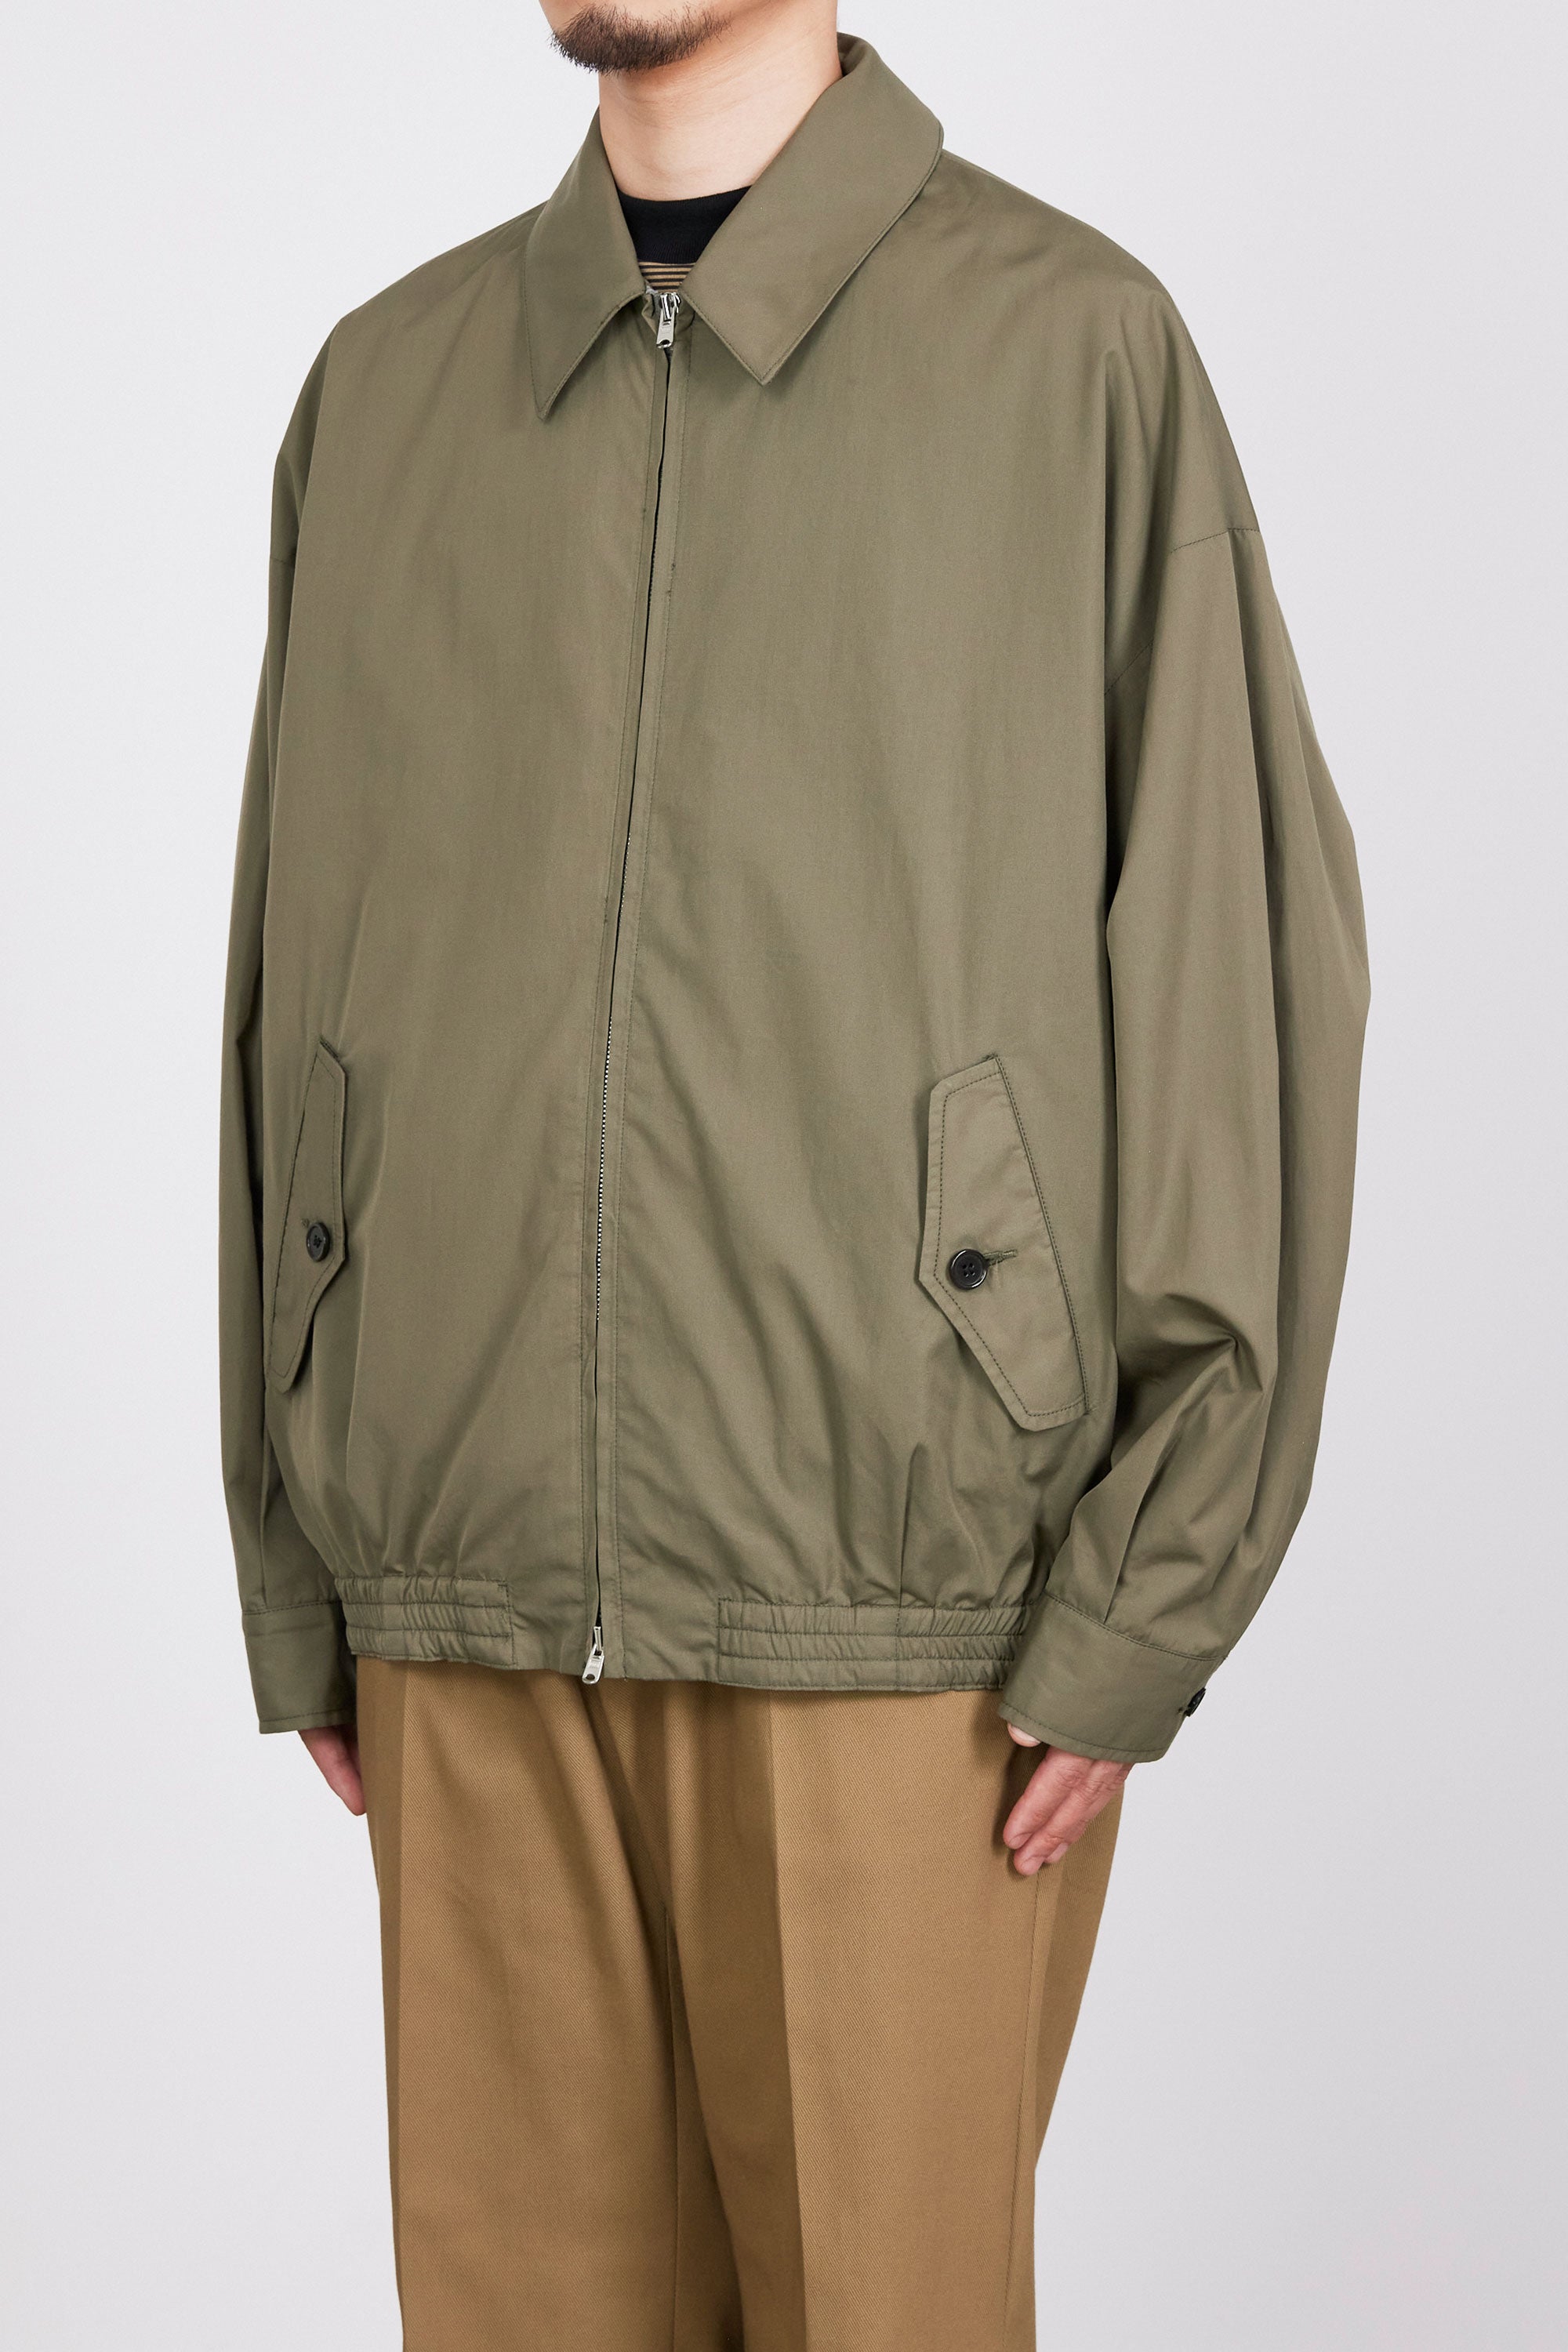 ULTRA LIGHT ALL WEATHER CLOTH WIDE SPORTS JACKET, Sage Green